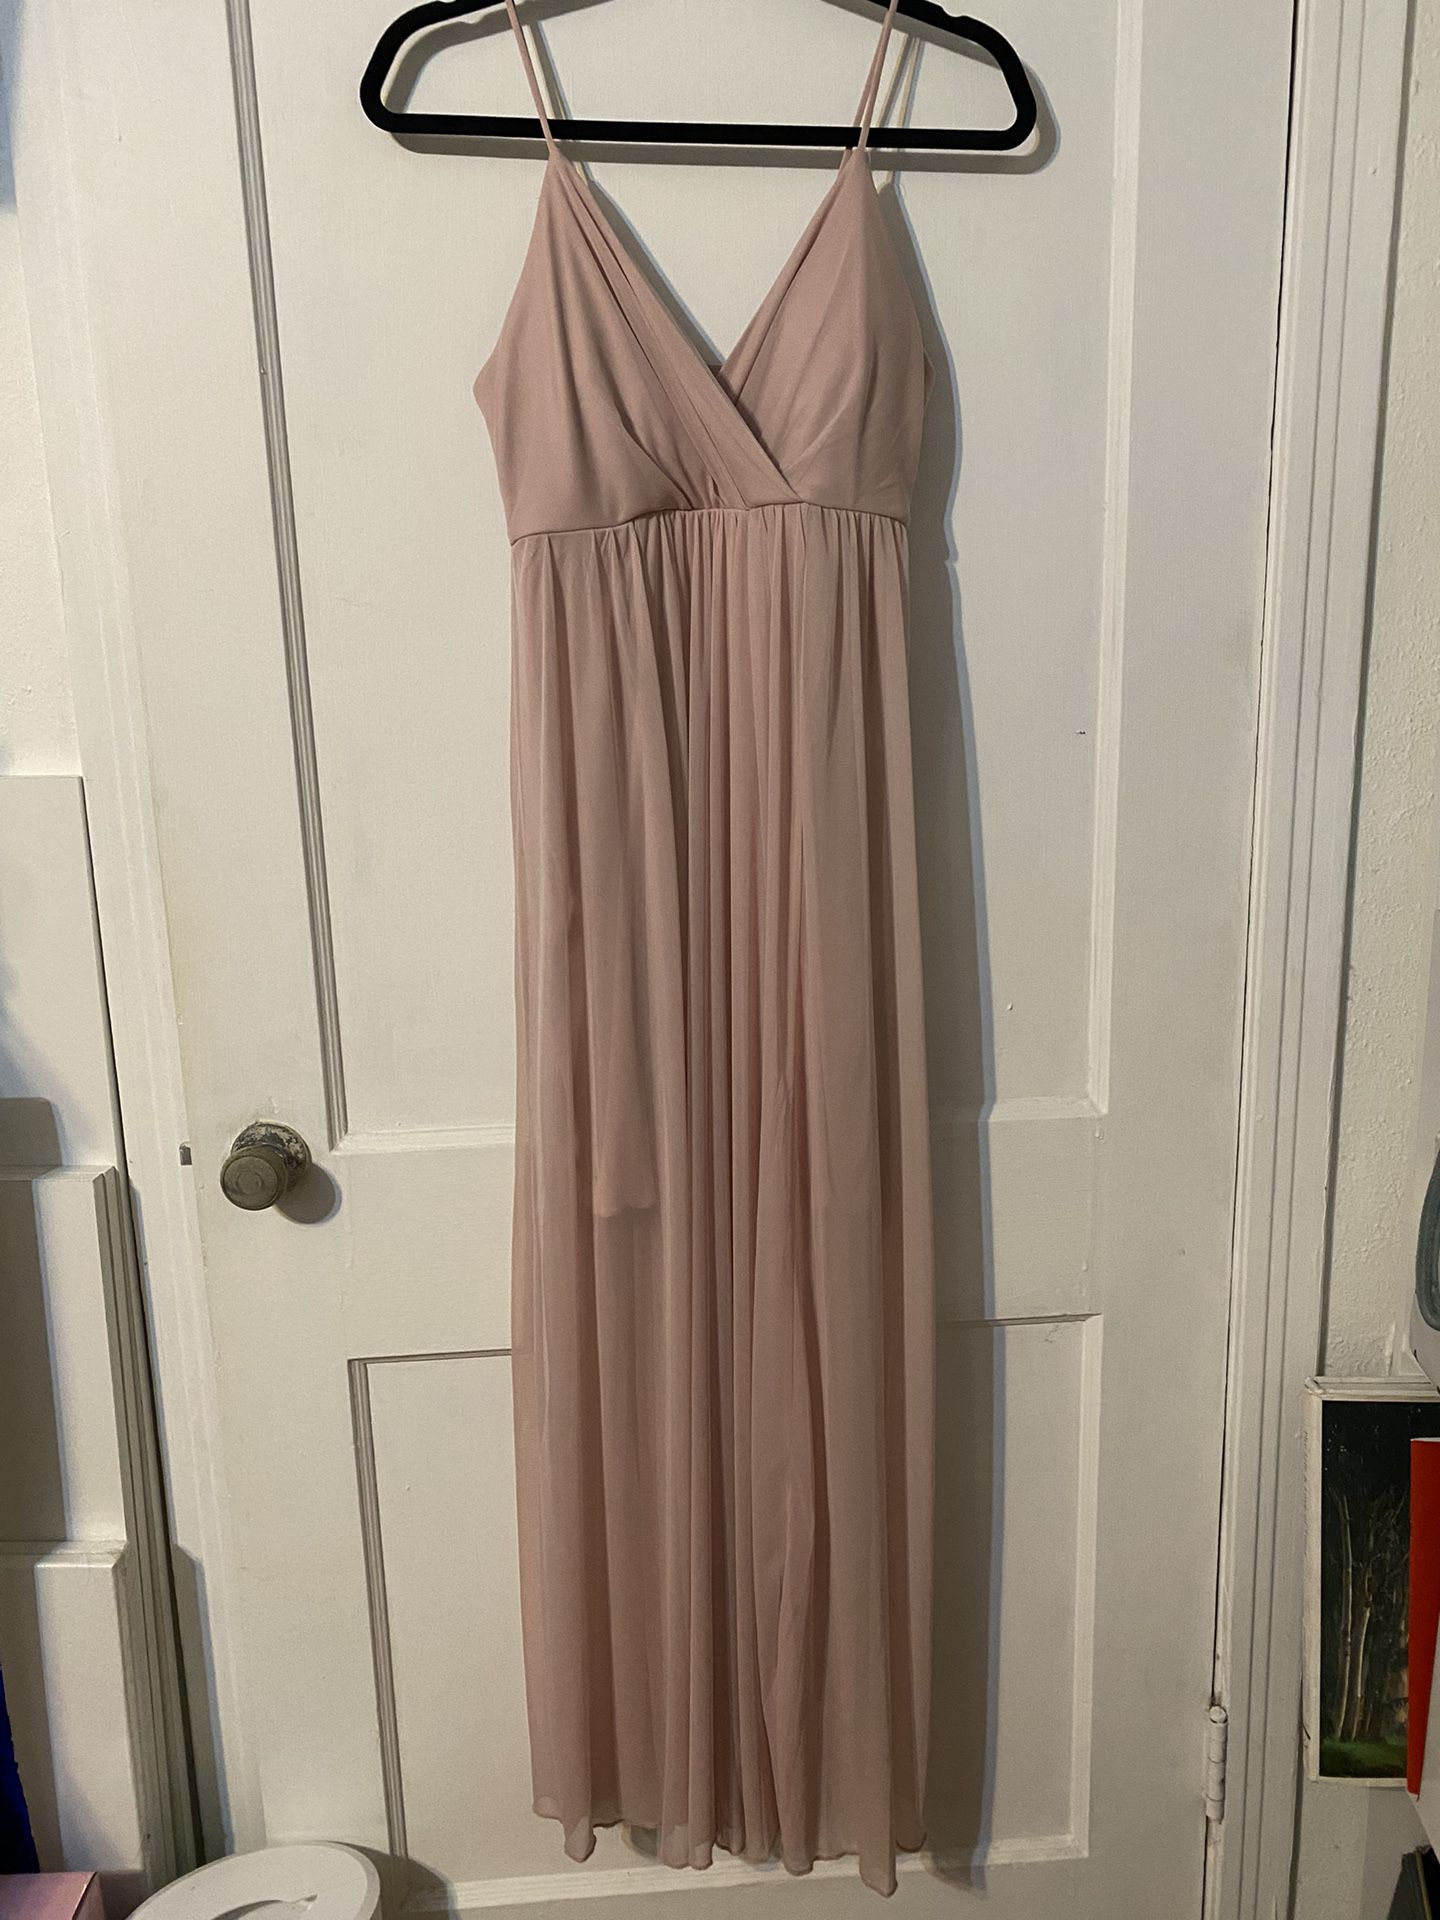 Baby Pink Formal Dress Size Small